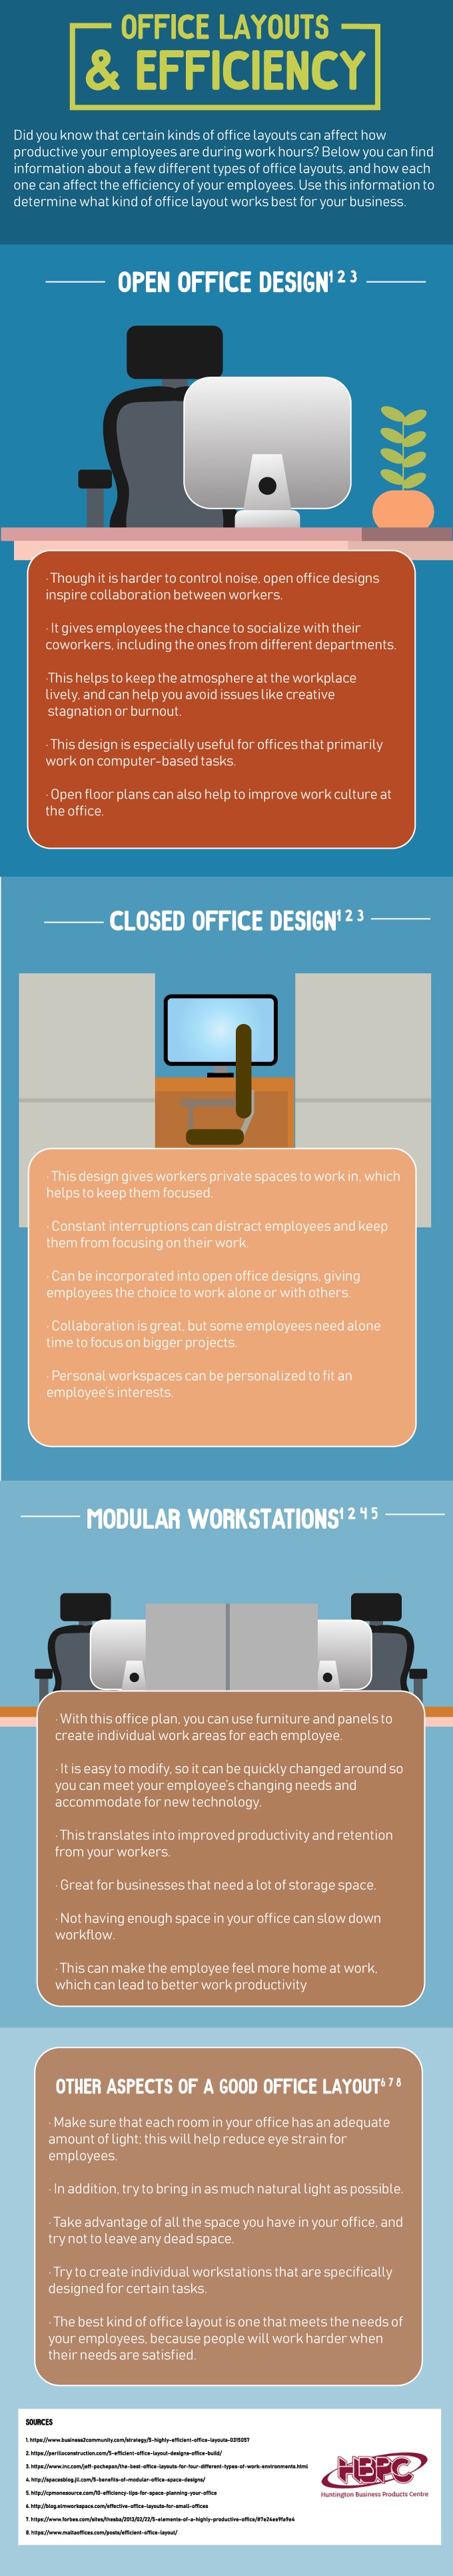 [Infographic] Office Layouts & Efficiency